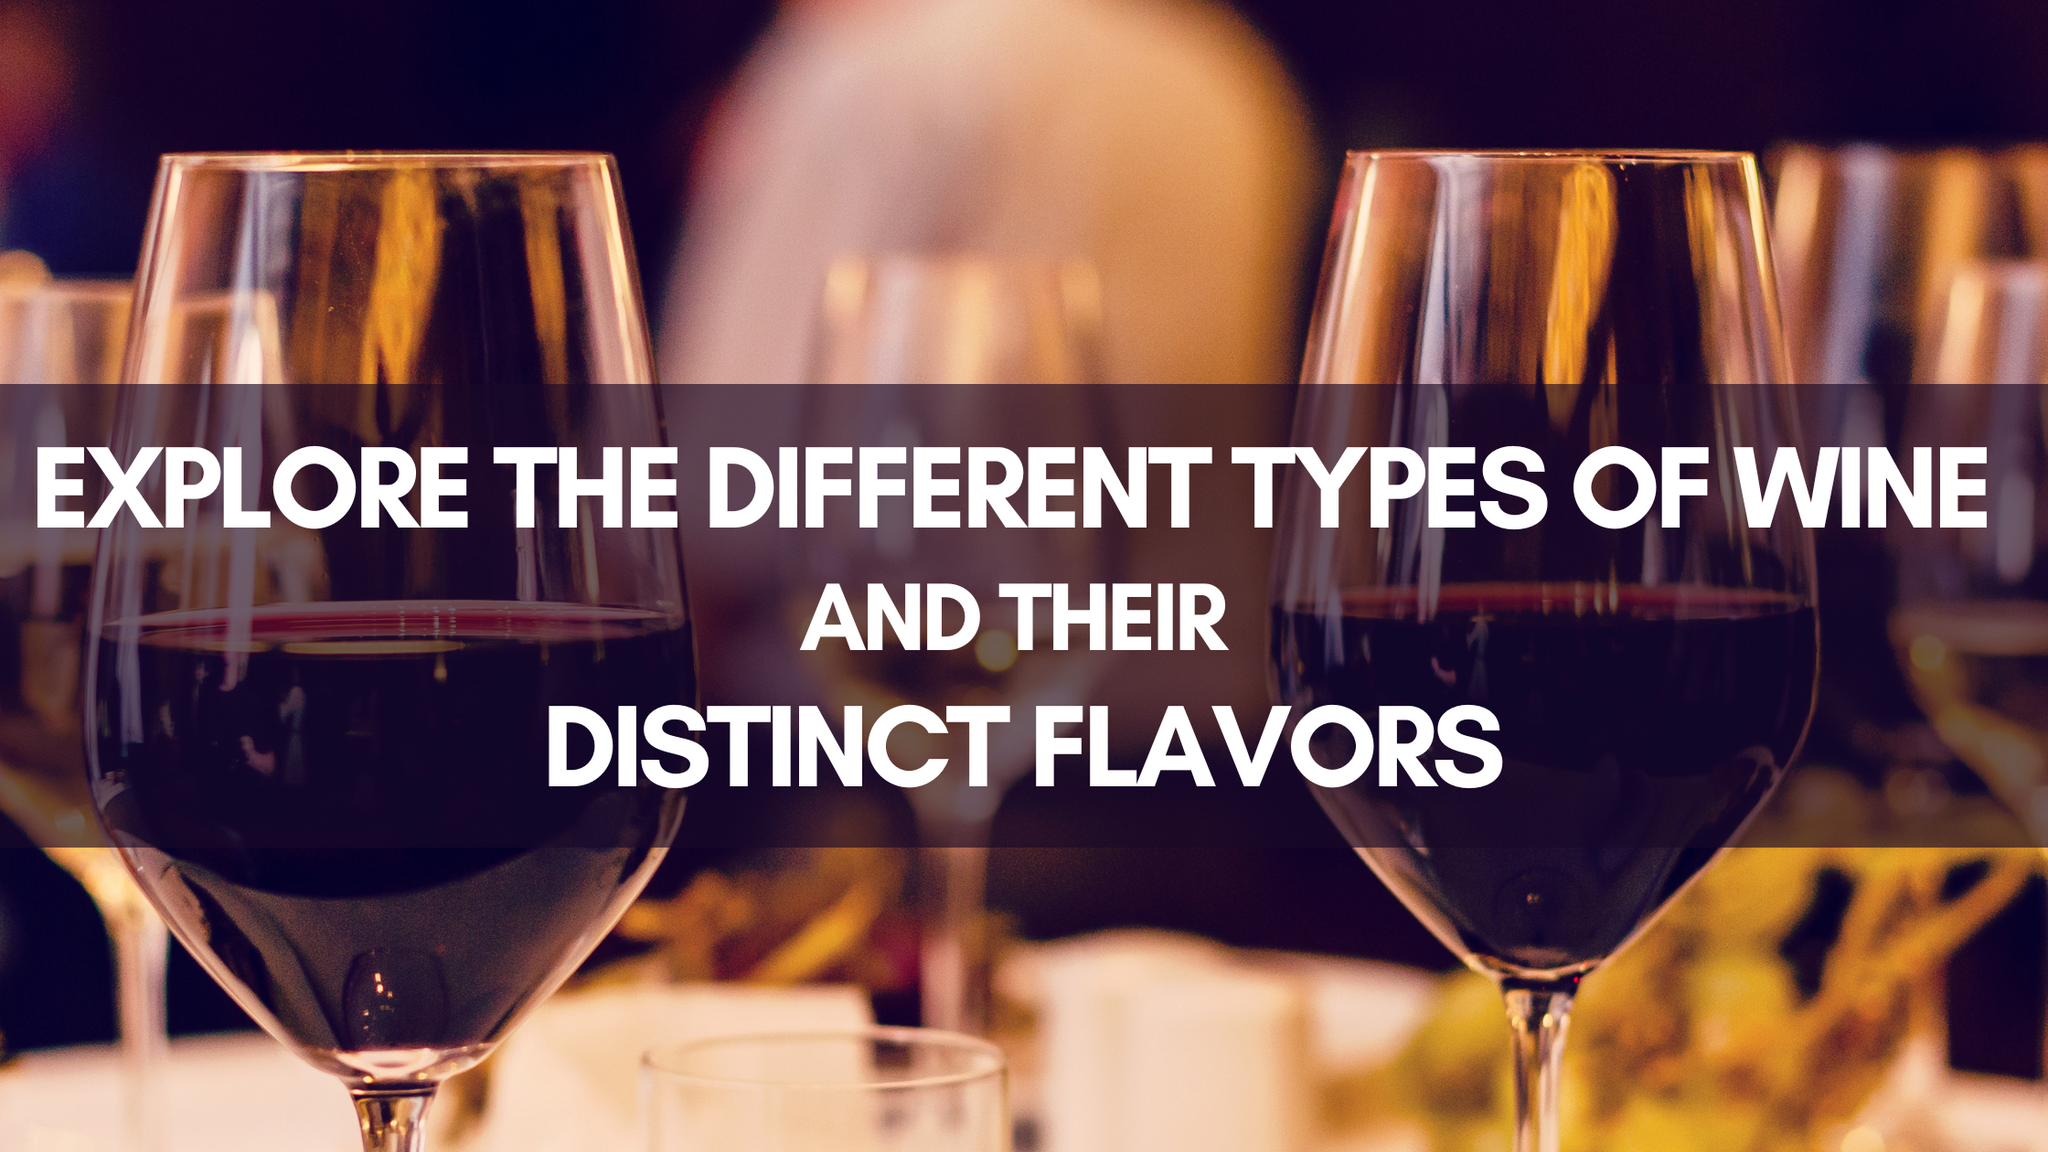 Explore the Different Types of Wine and their Distinct Flavors!